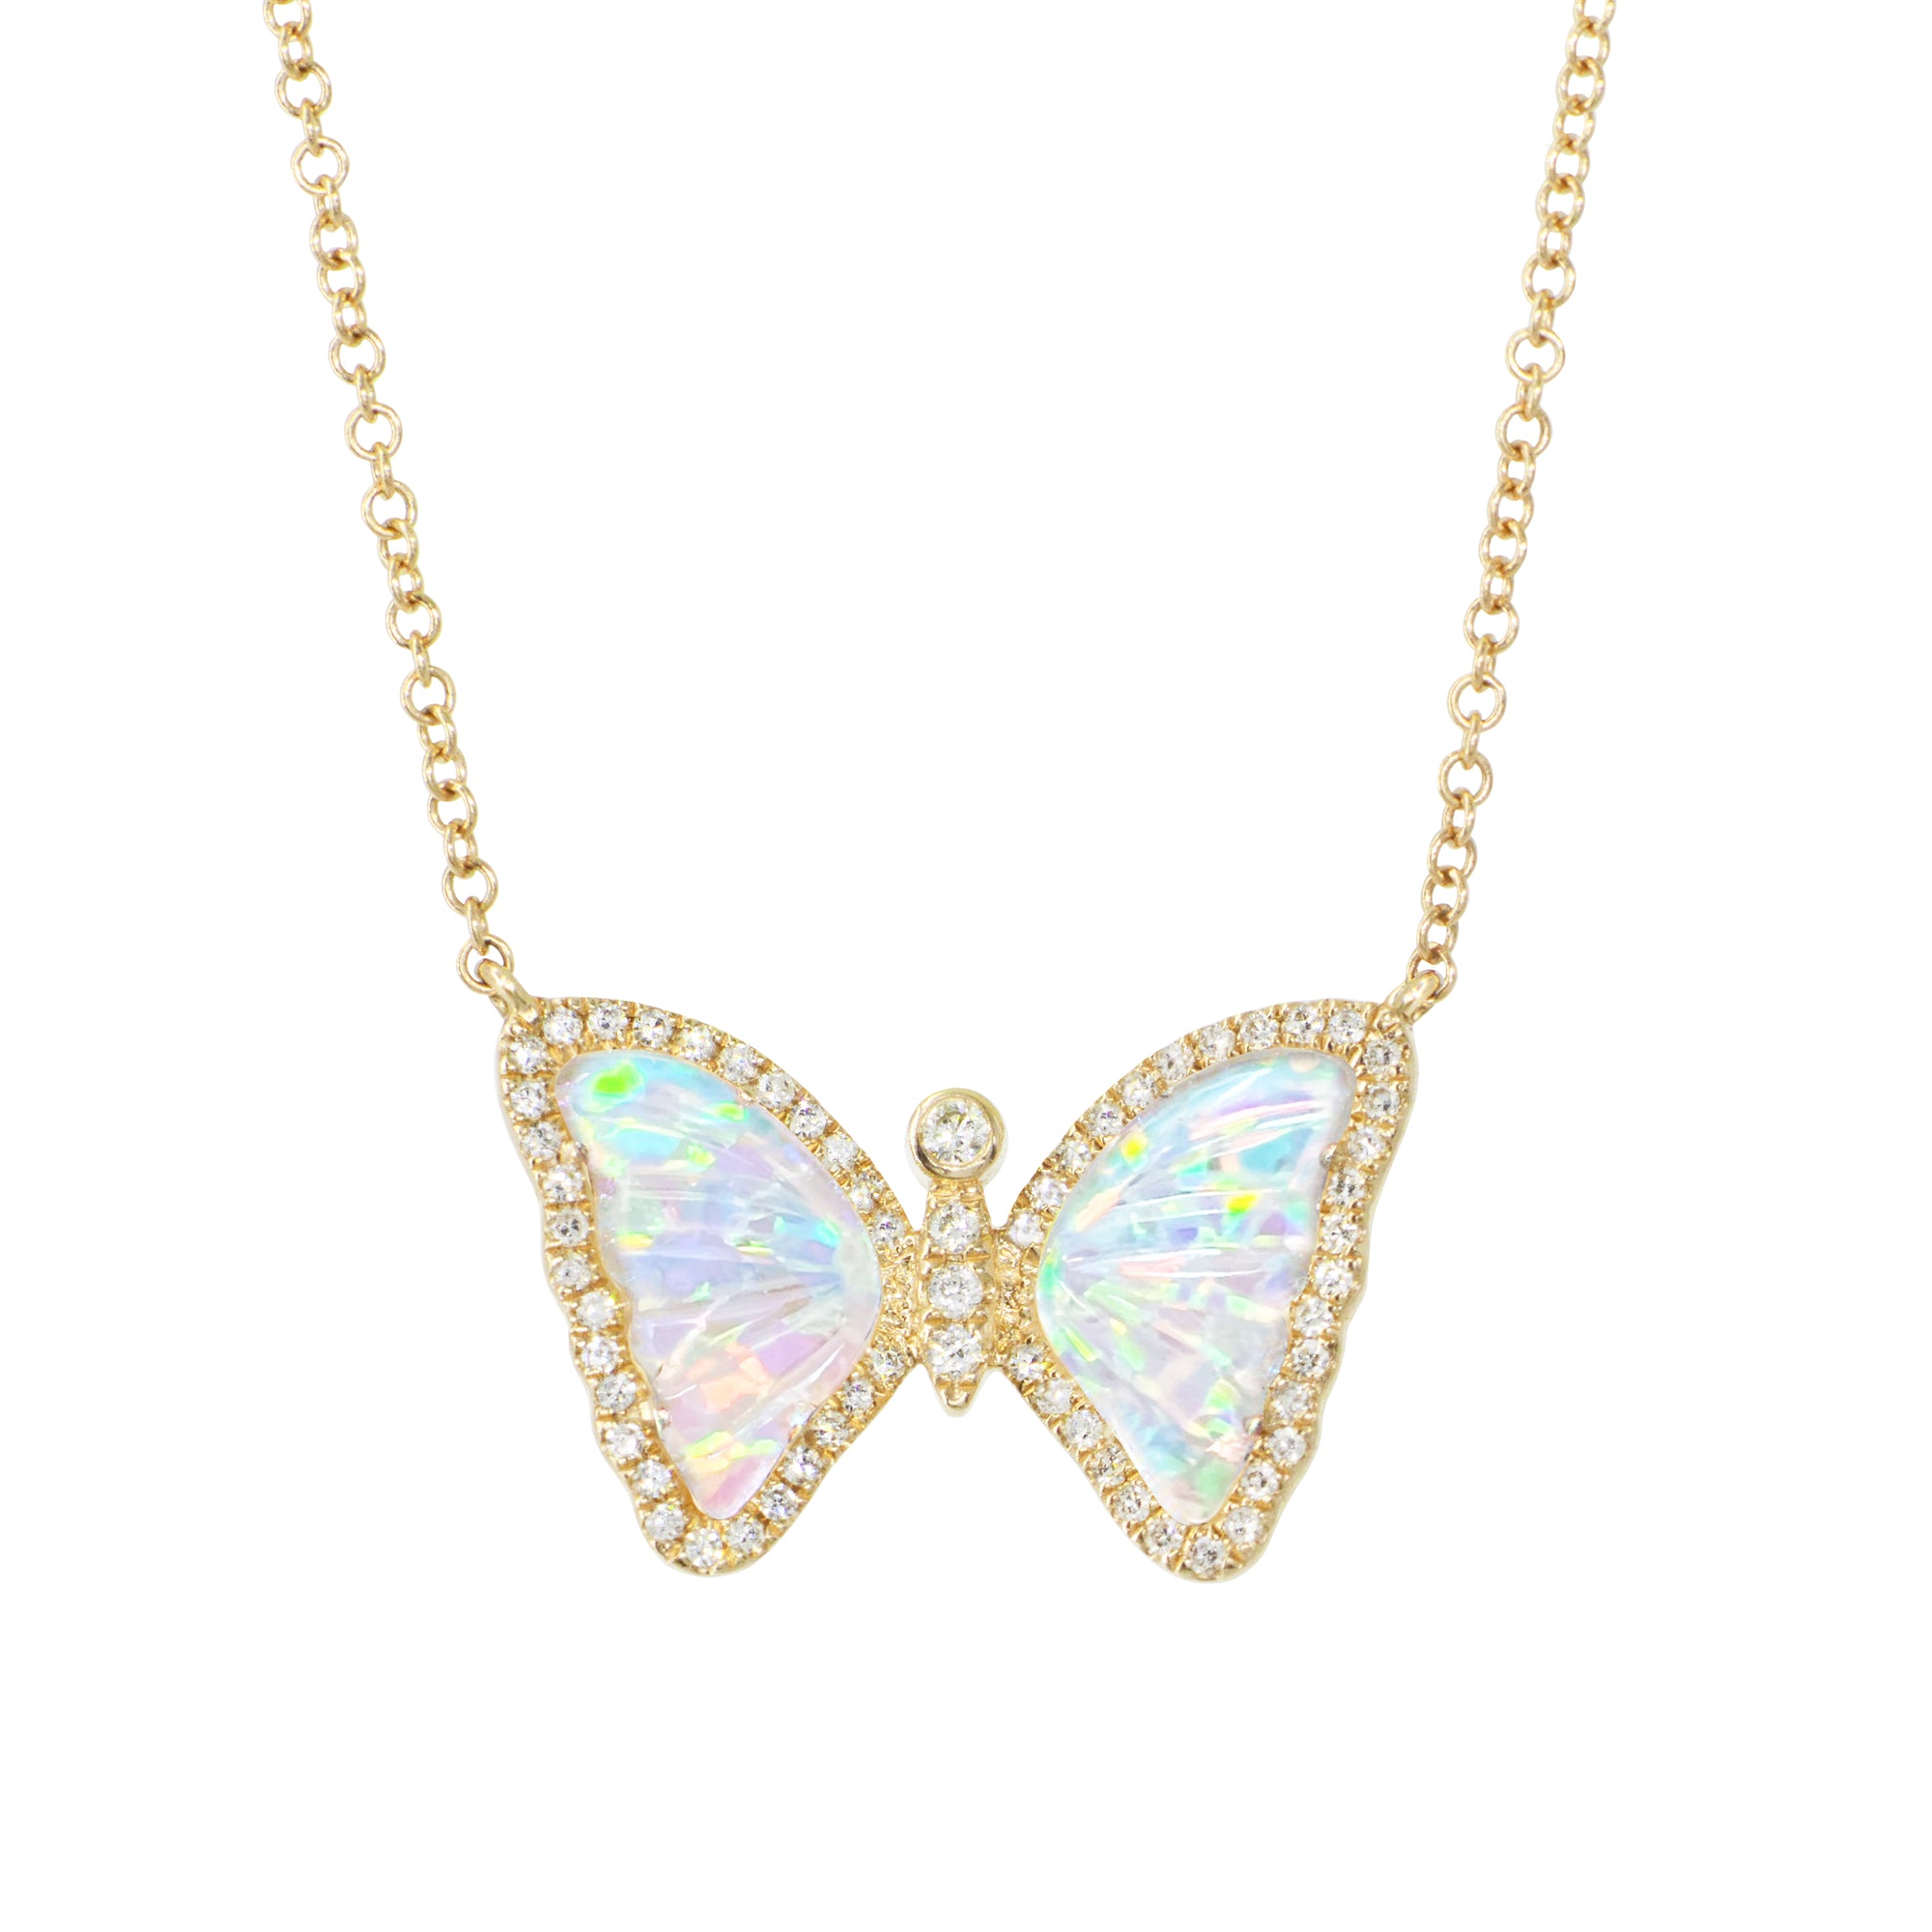 Mini Opal Butterfly Necklace with Diamonds - Galaxy